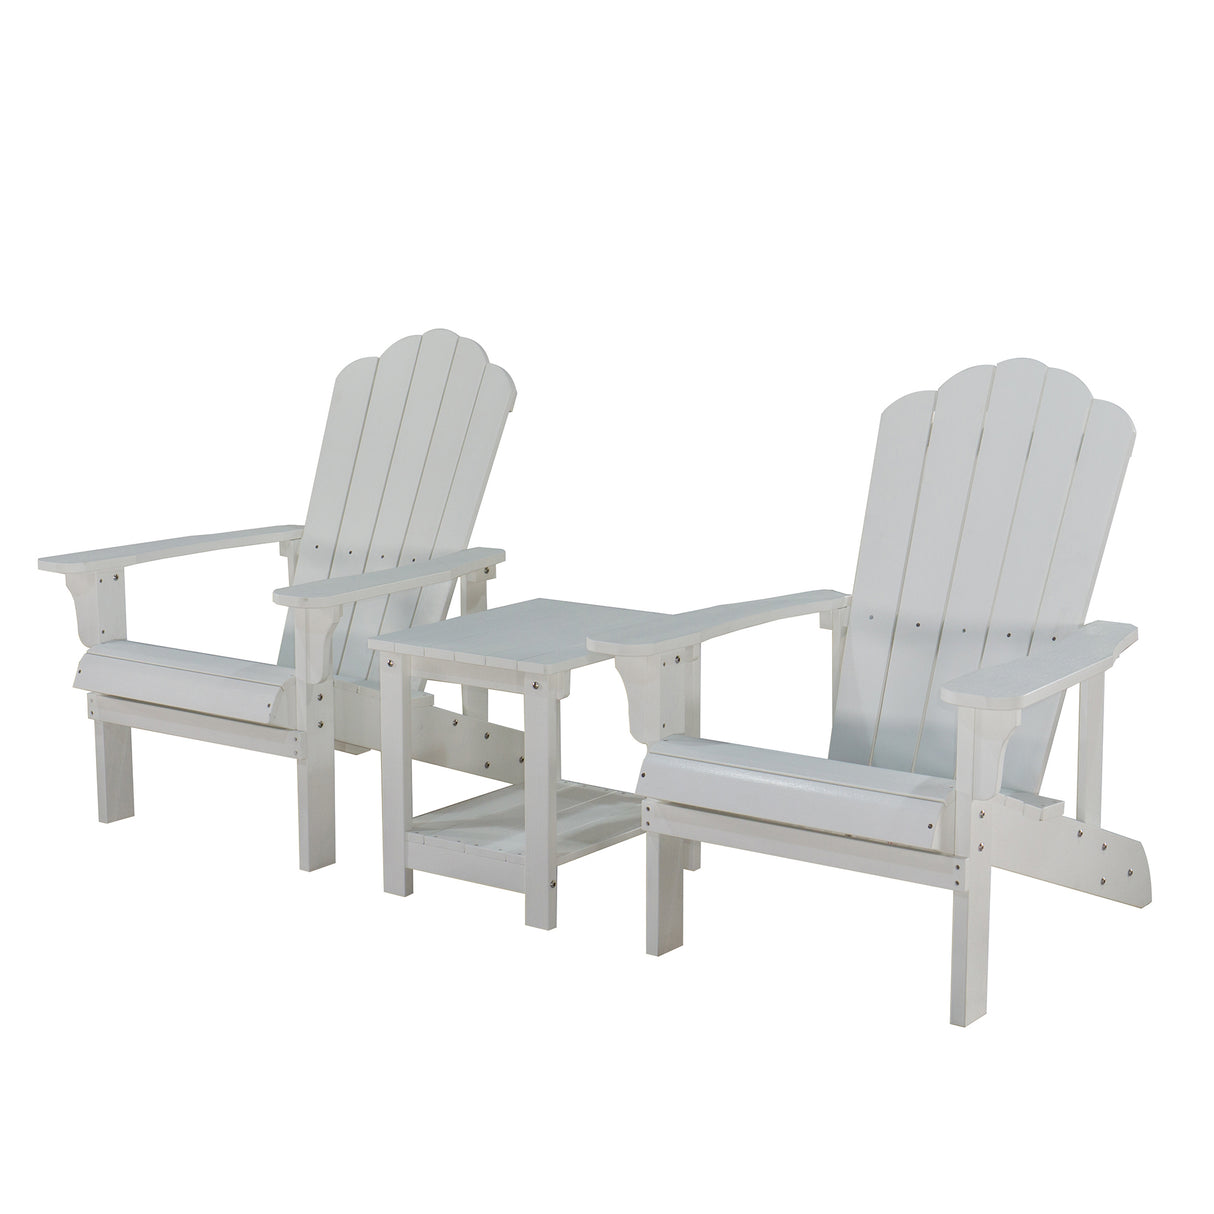 Key West 3 Piece Outdoor Patio All-Weather Plastic Wood Adirondack Bistro Set, 2 Adirondack chairs, and 1 small, side, end table set for Deck, Backyards, Garden, Lawns, Poolside, and Beaches, White